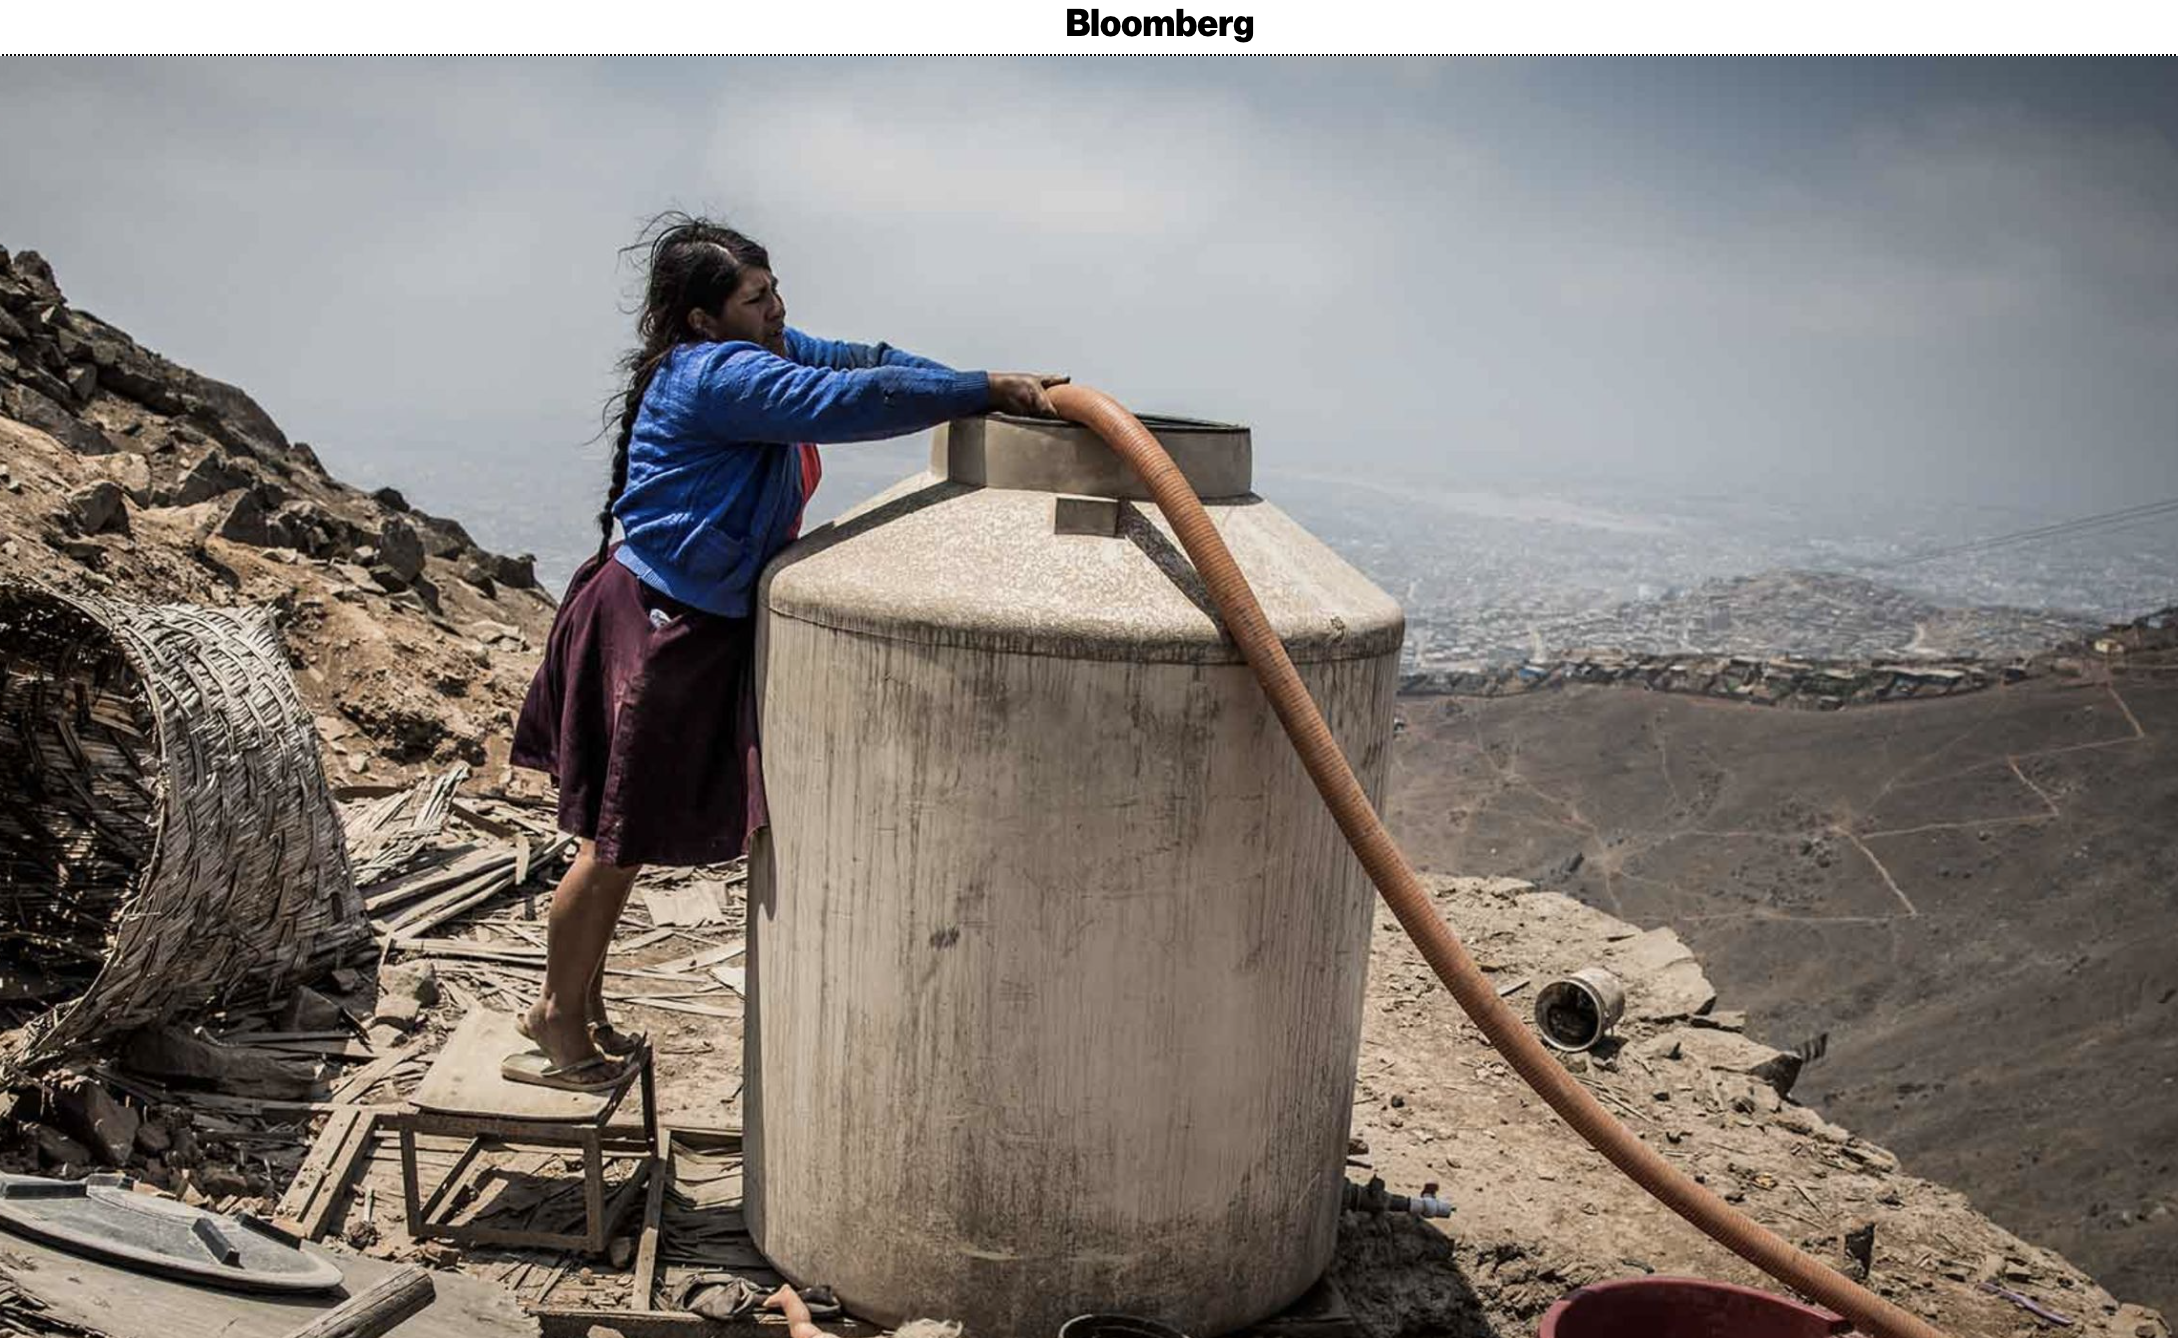 on Bloomberg Businessweek: Lima's Poorest Residents Are Buying Drinking Water From a Truck